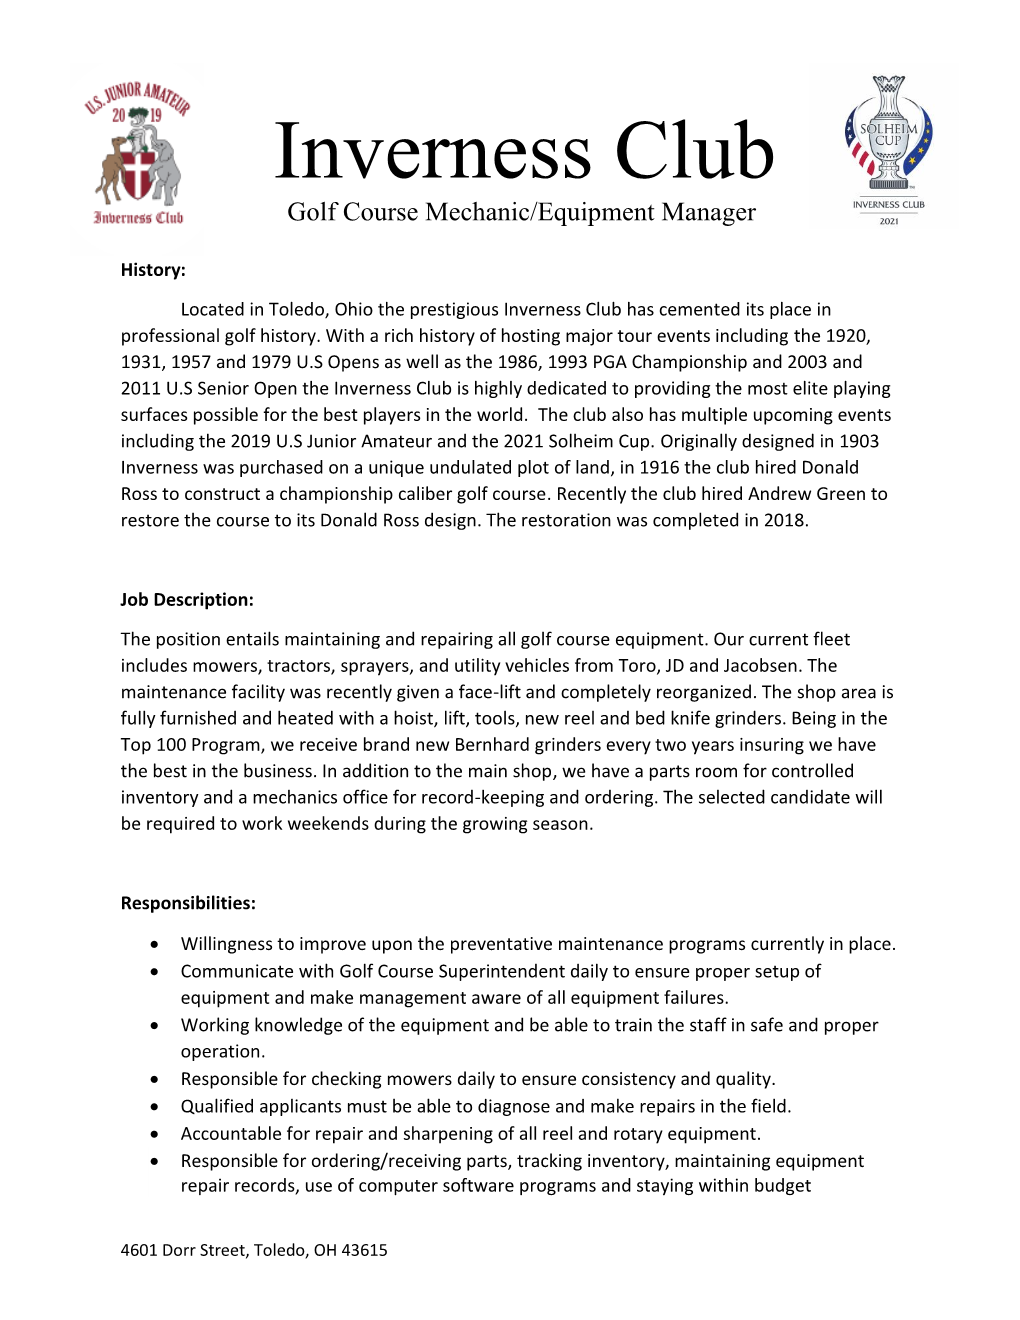 Inverness Club Golf Course Mechanic/Equipment Manager